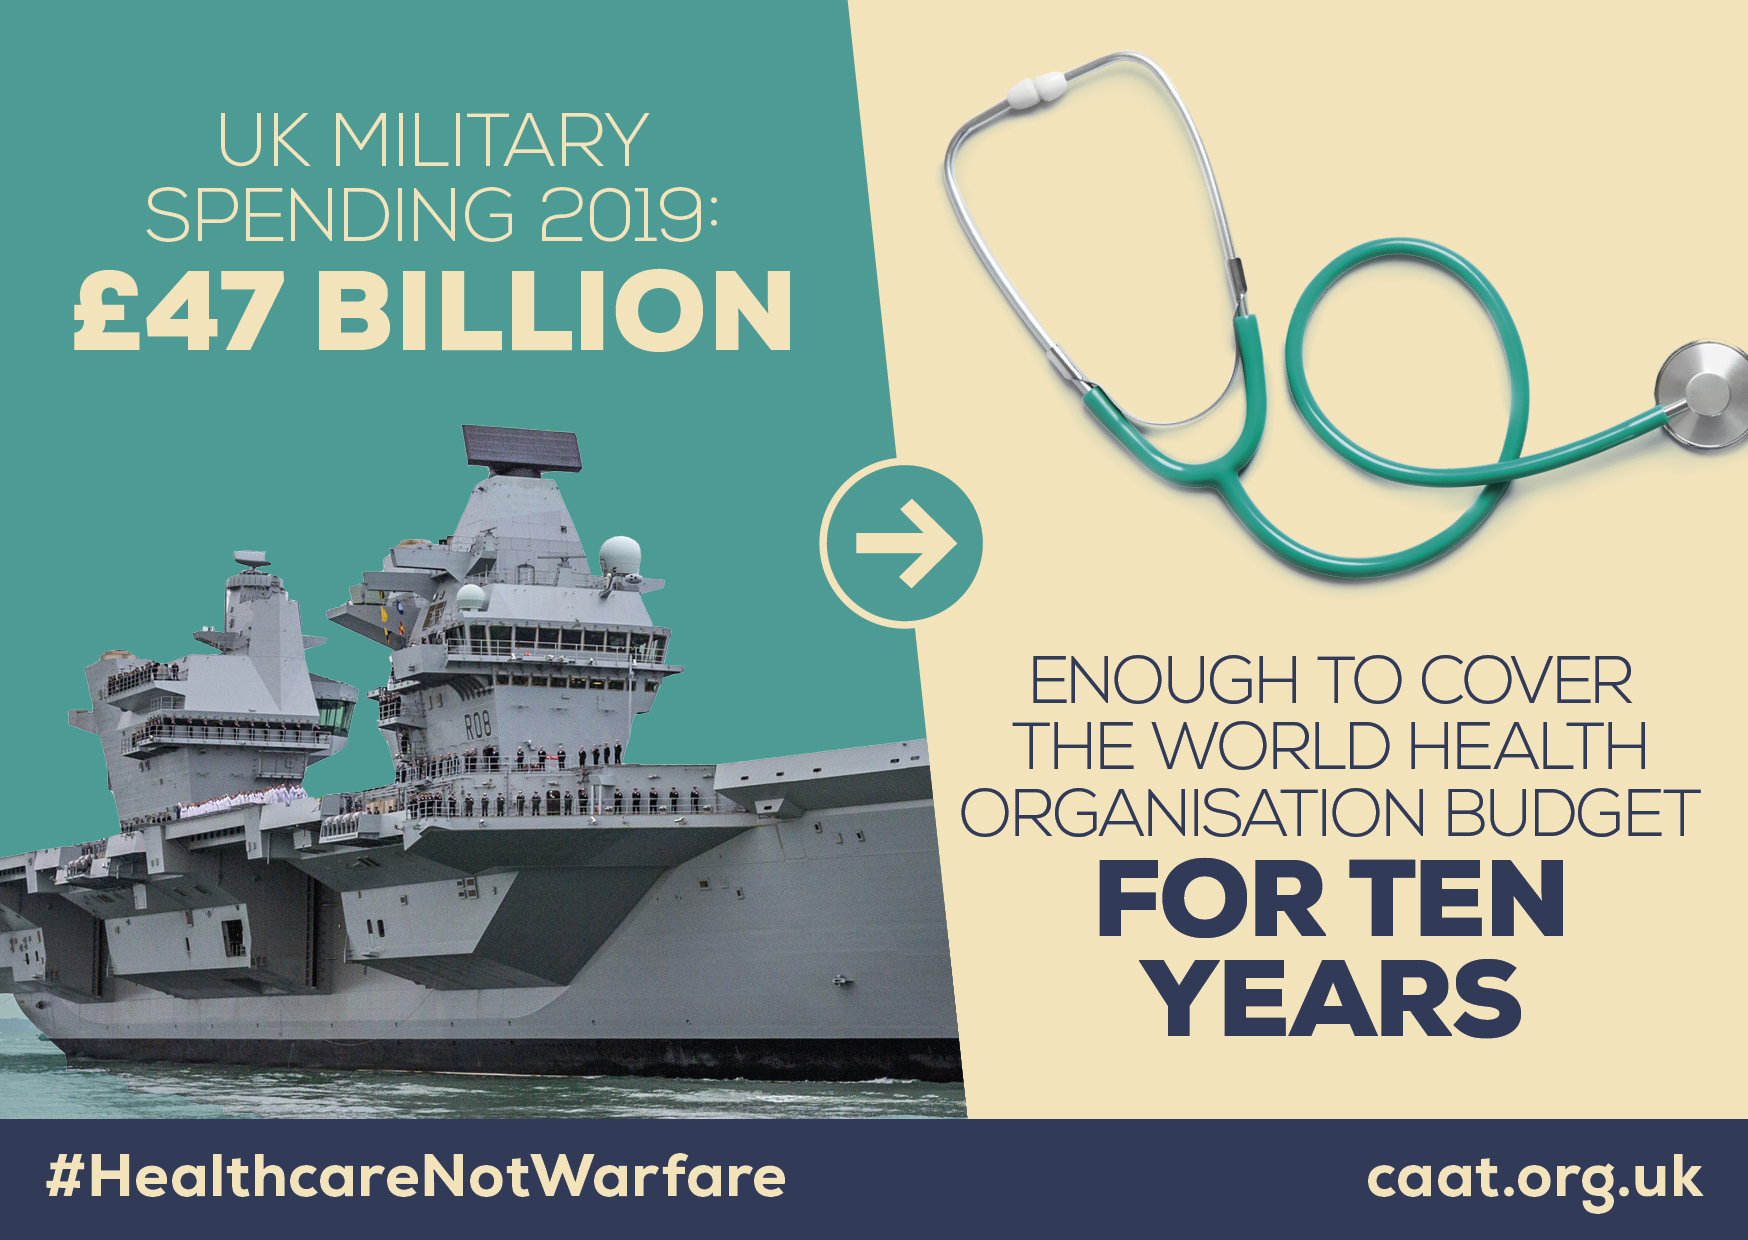 teal and yellow image with war ship and stethoscope and text 'UK military spending in 2019: £47 billion, enough to cover the WHO budget for ten years'